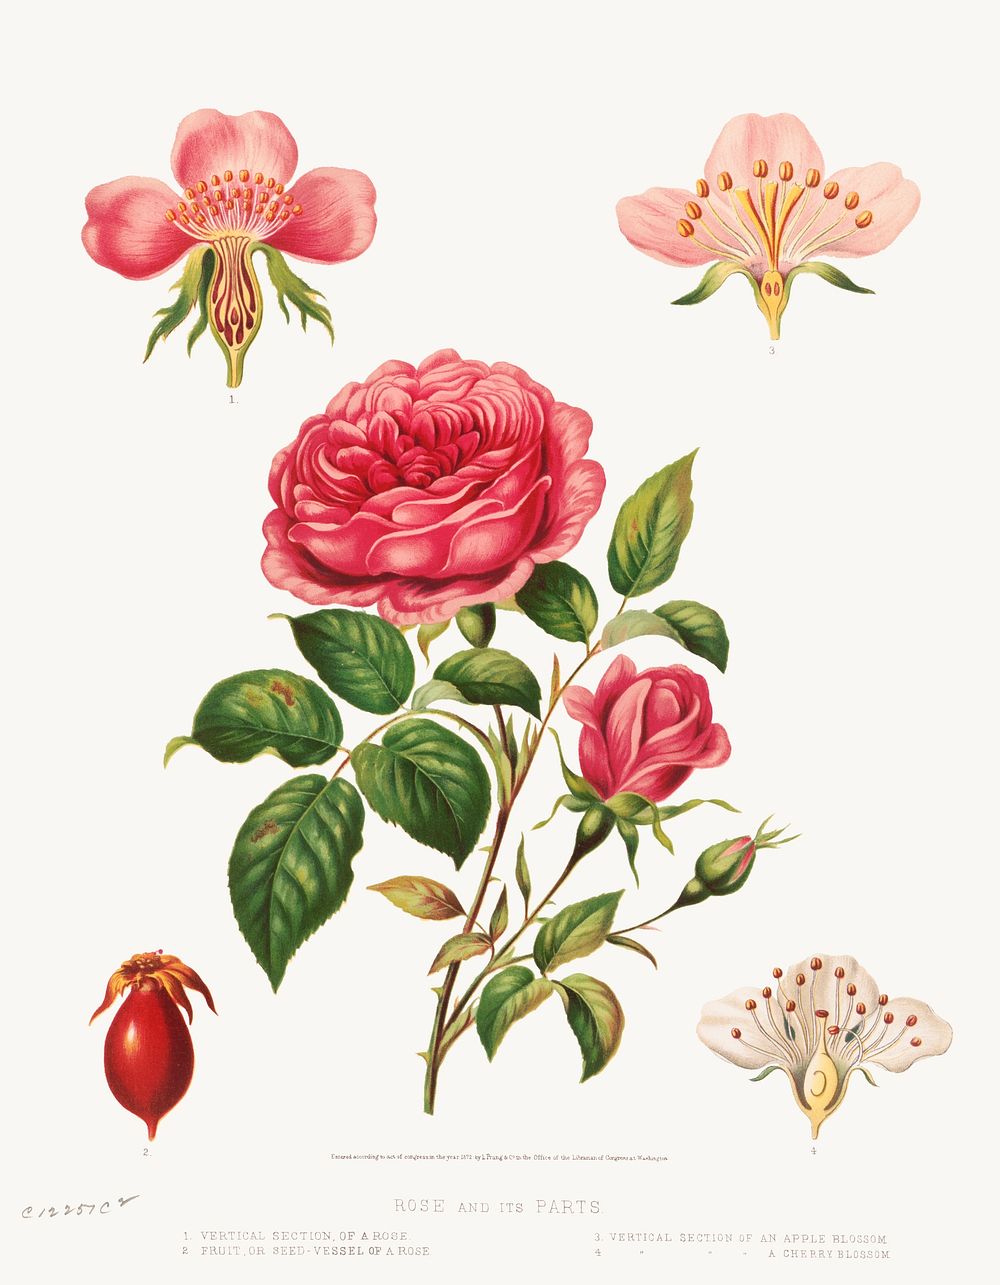 Rose and its parts (1872) in high resolution by L. Prang & Co. Original from The Library of Congress. Digitally enhanced by…